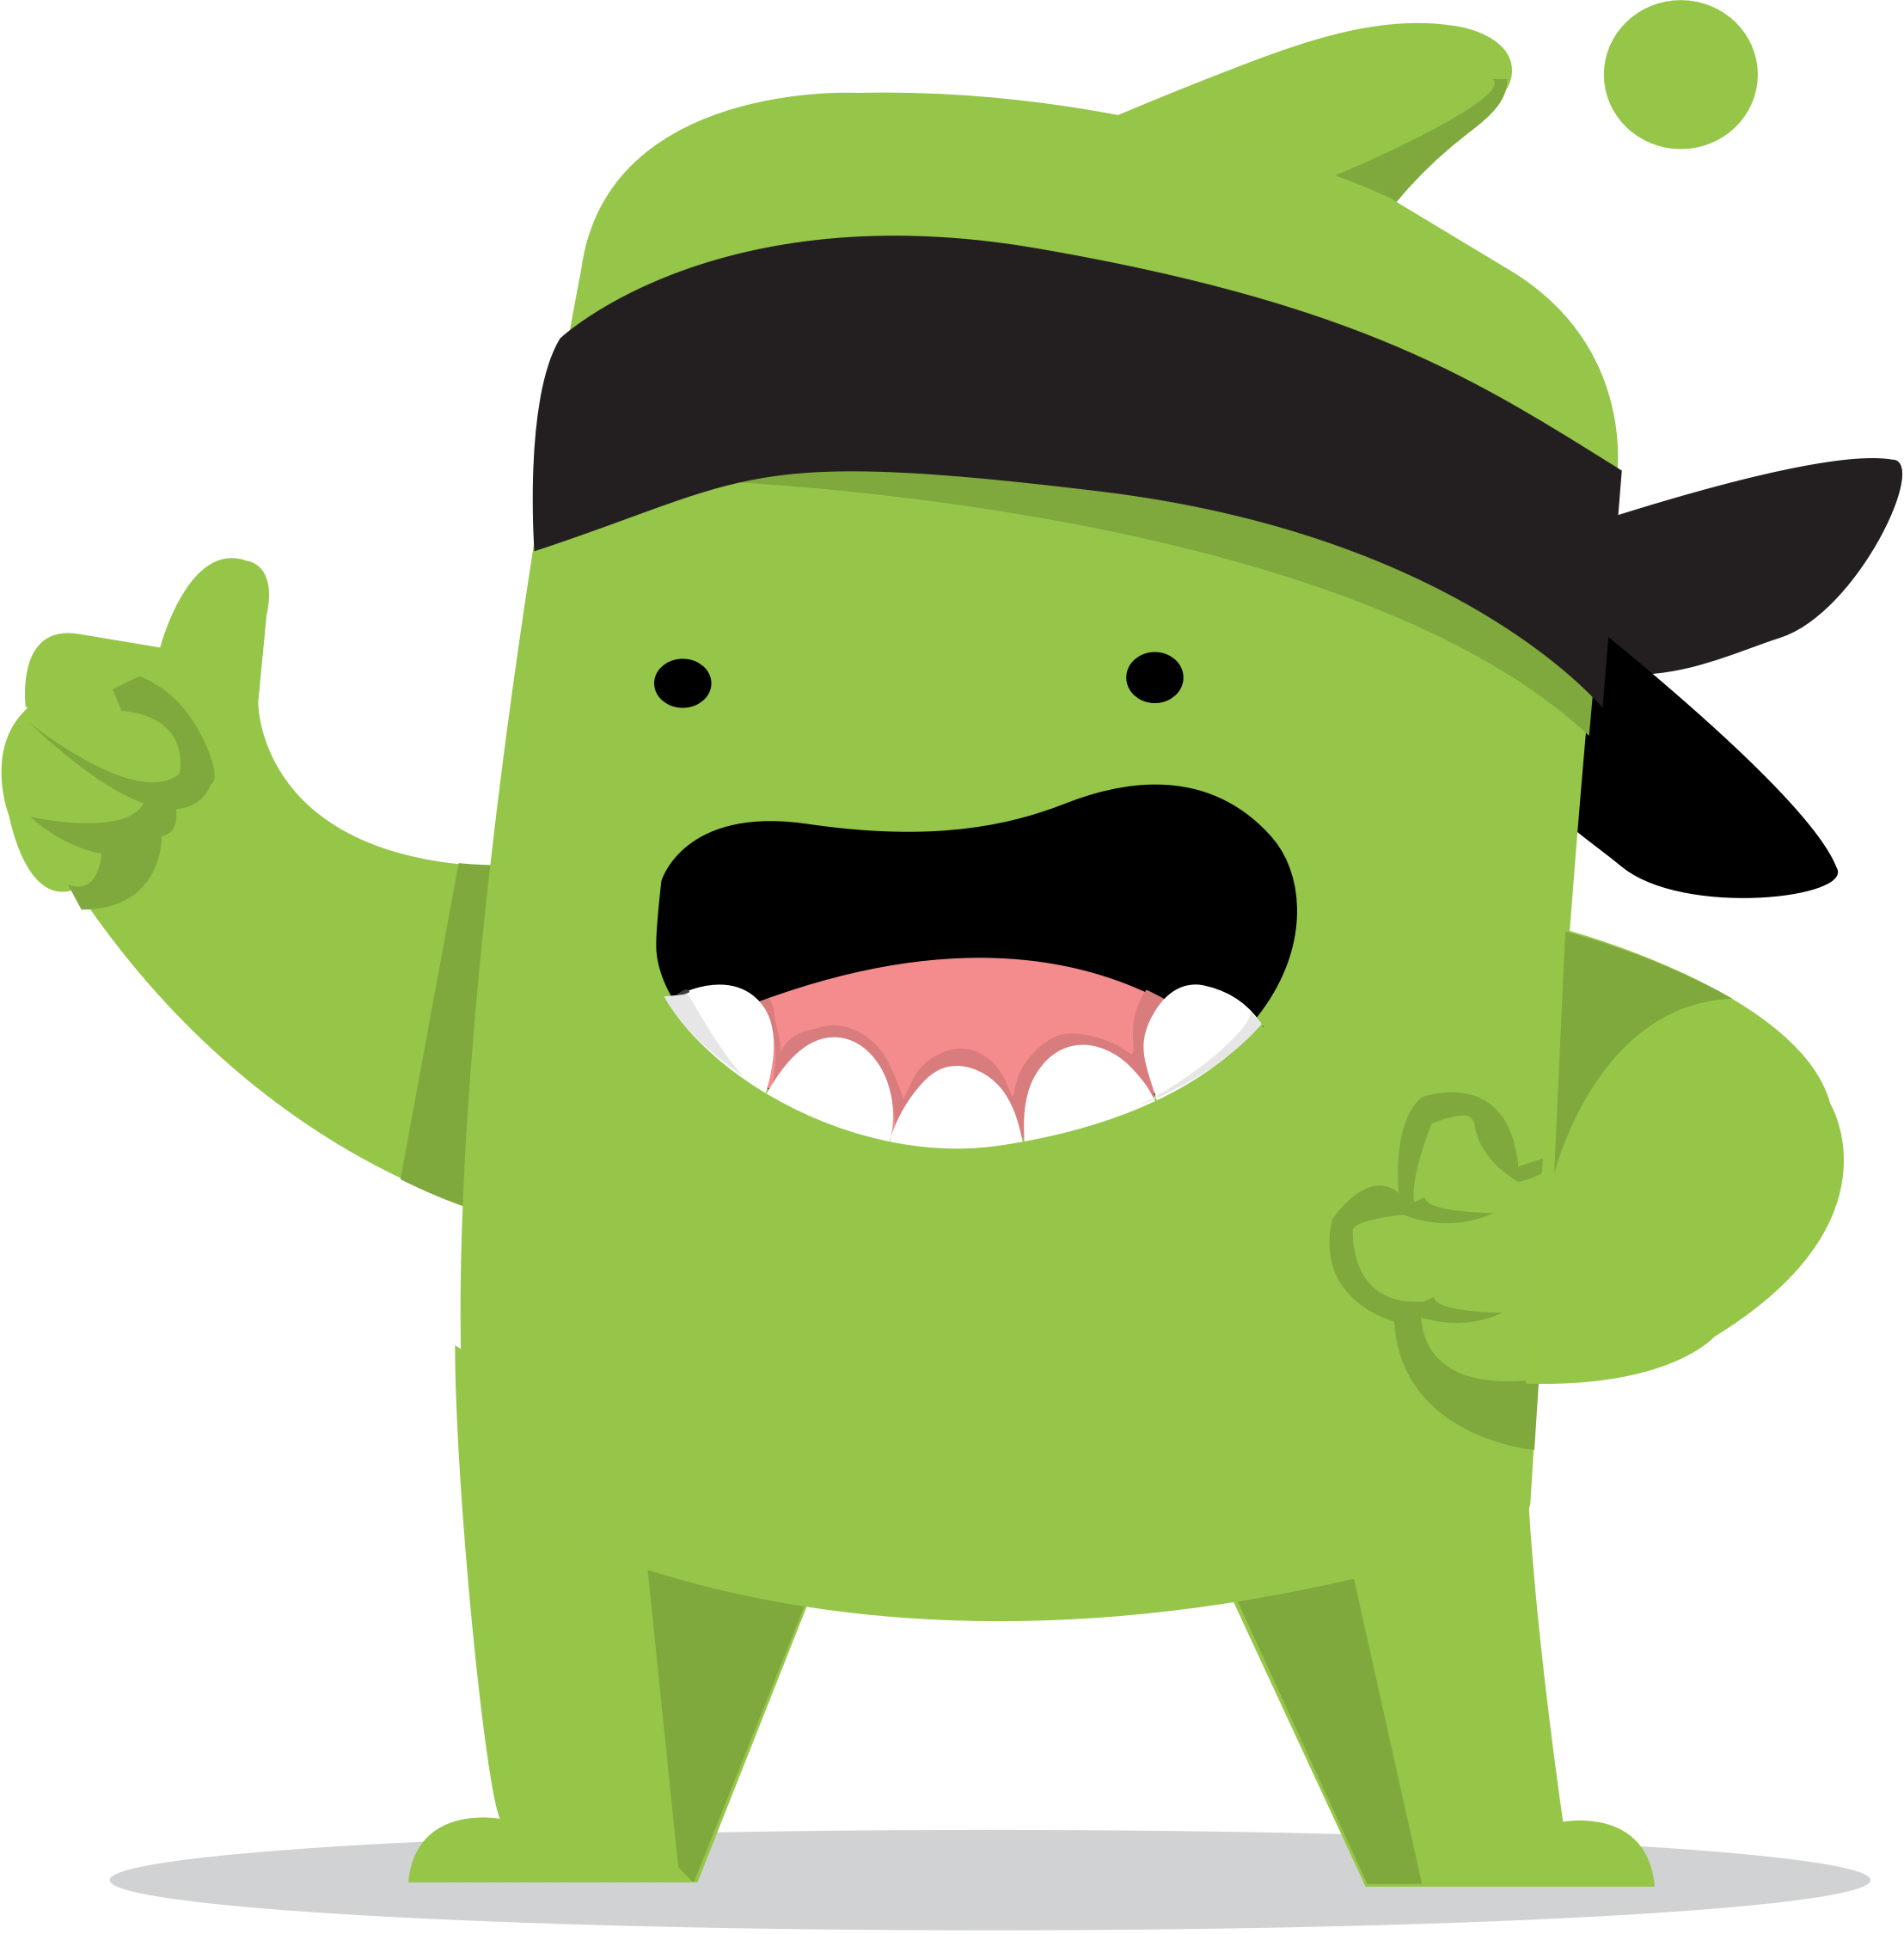 Cute Green Monster PNG Transparent Image